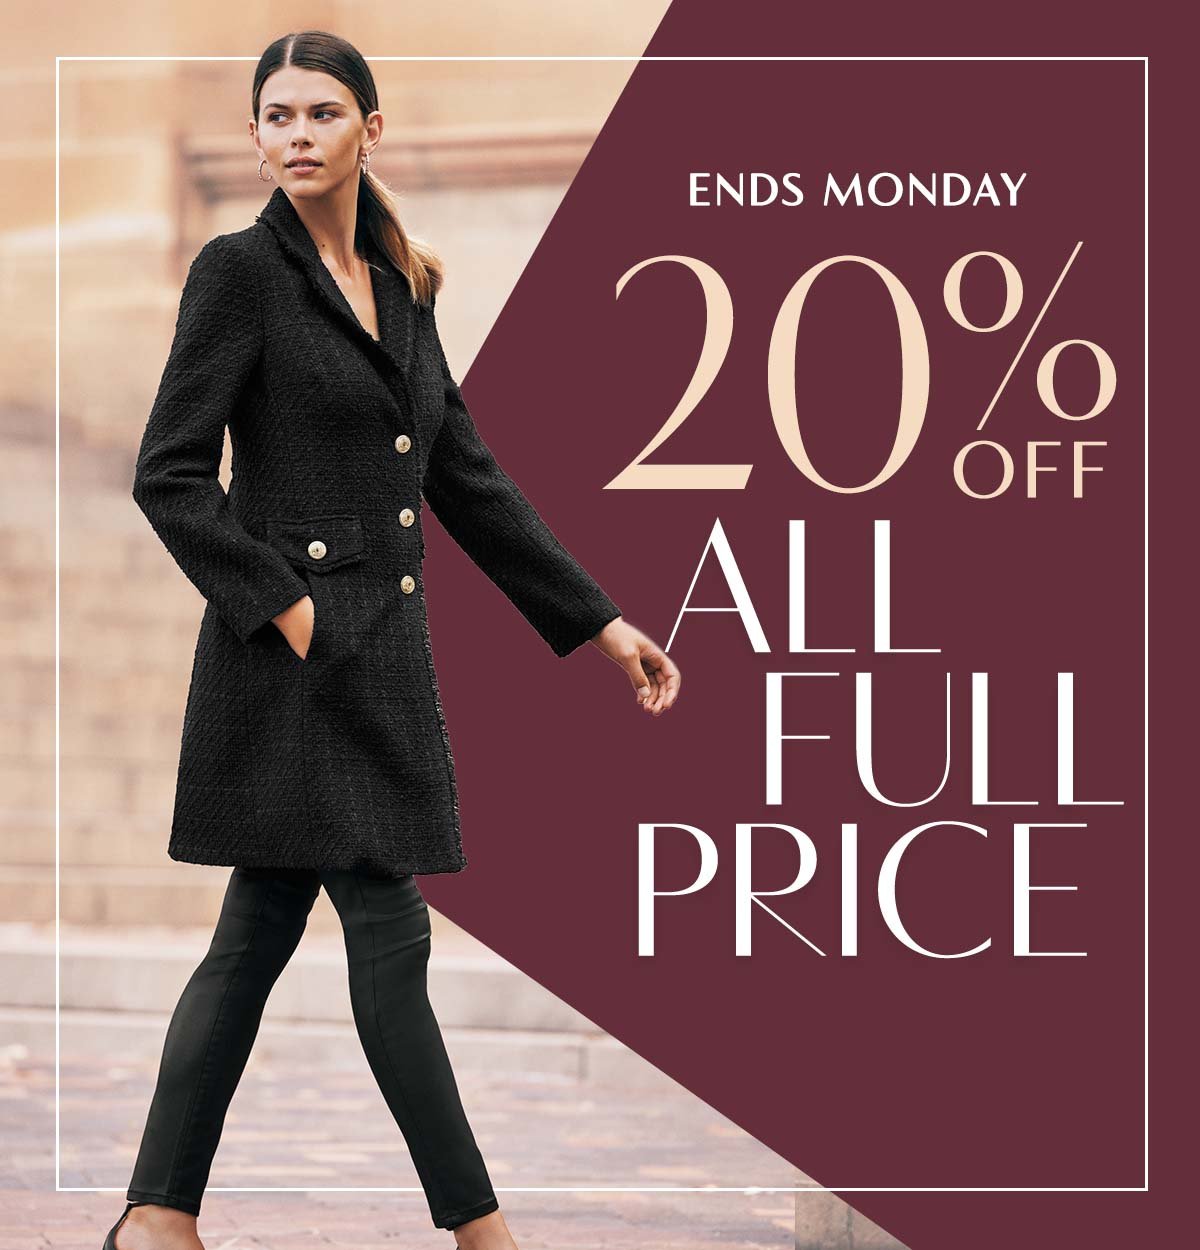 20% Off All Full Price. 850+ Styles. Ends Monday.